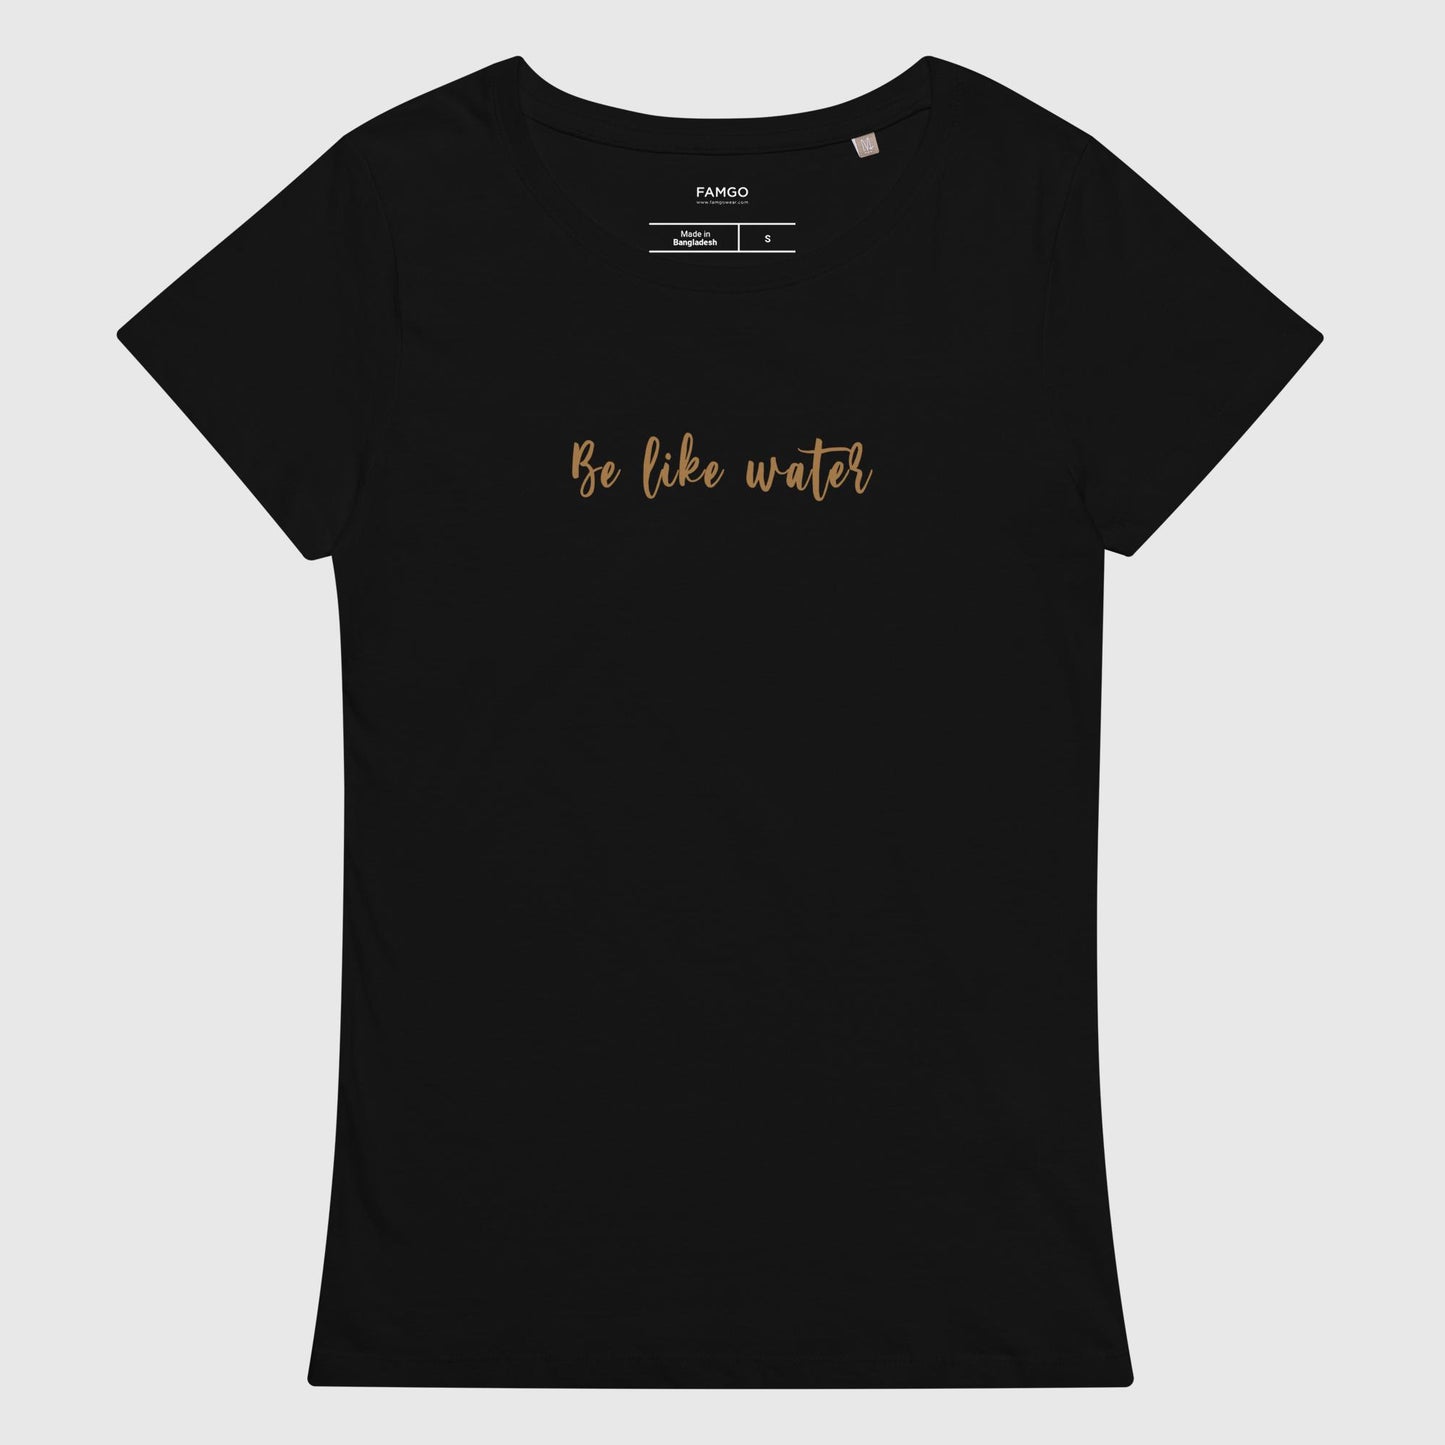 Women's black organic cotton t-shirt that features Bruce Lee's inspirational quote, "Be Like Water."